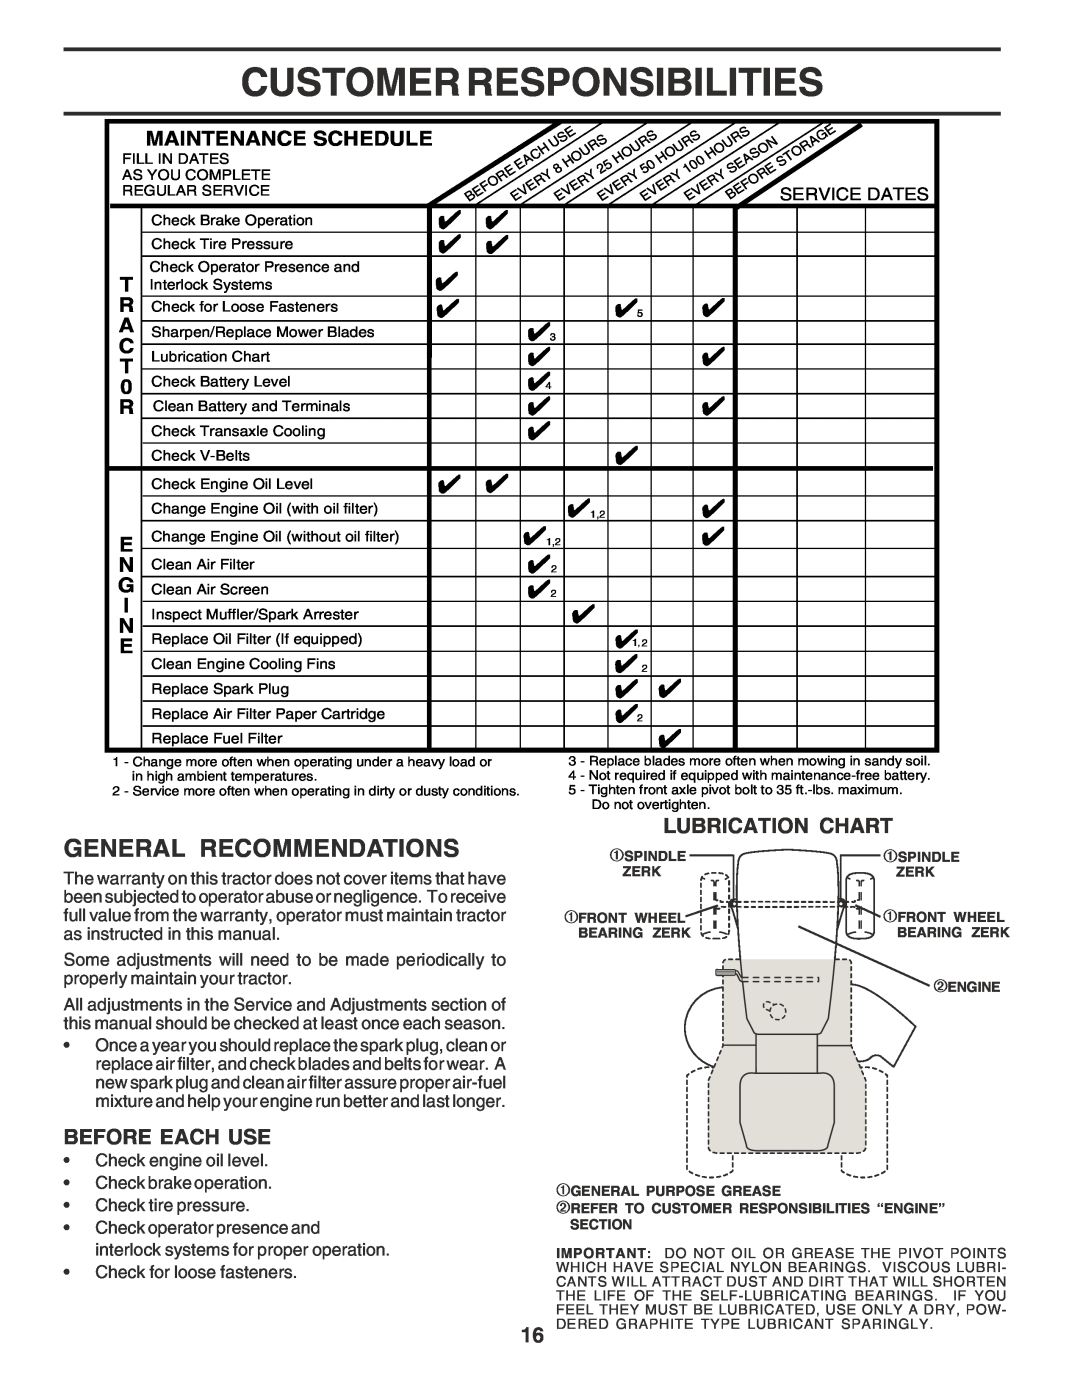 Poulan PPR20H42STA owner manual Customer Responsibilities, General Recommendations, Lubrication Chart, Before Each Use 